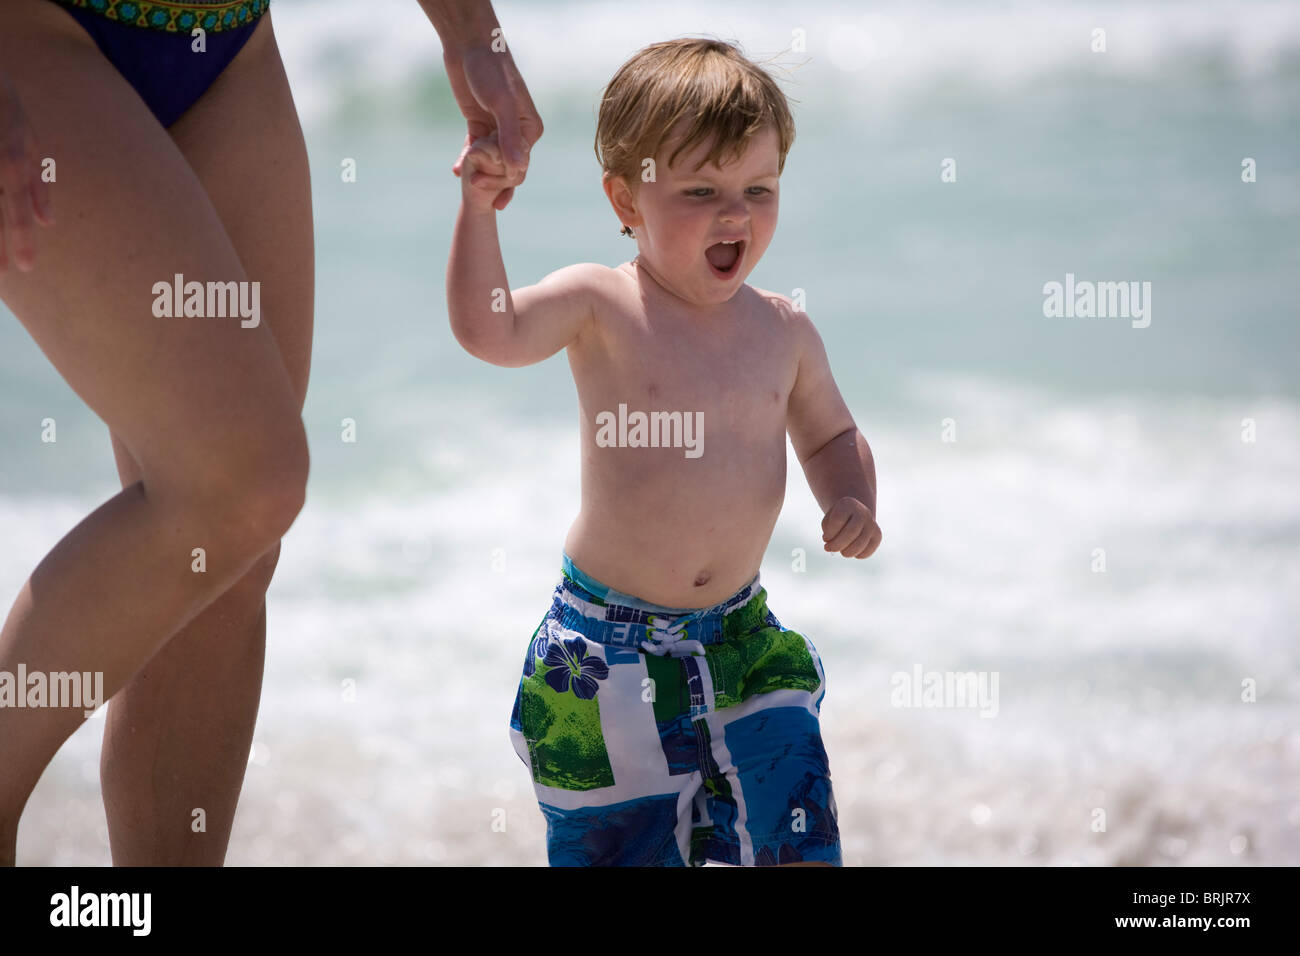 A boy and mom are holding hands at the beach. Stock Photo